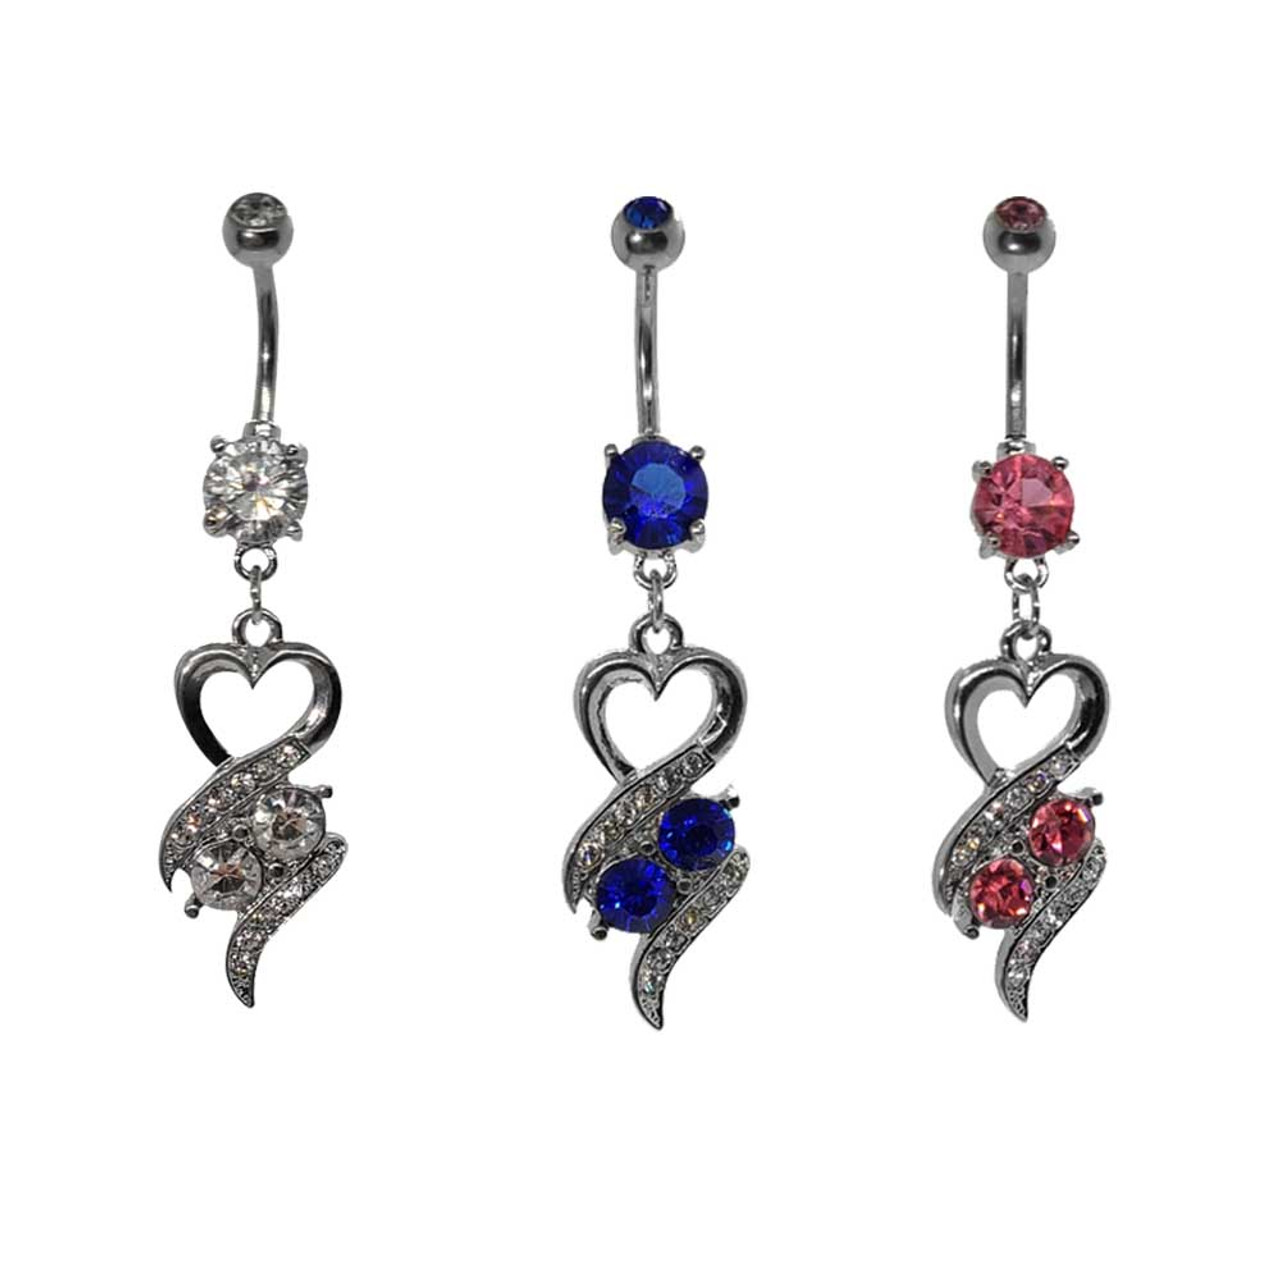 Painful Pleasures 14g 7/16 Jeweled Steel Belly Button Ring with Heart Clamp Dangle